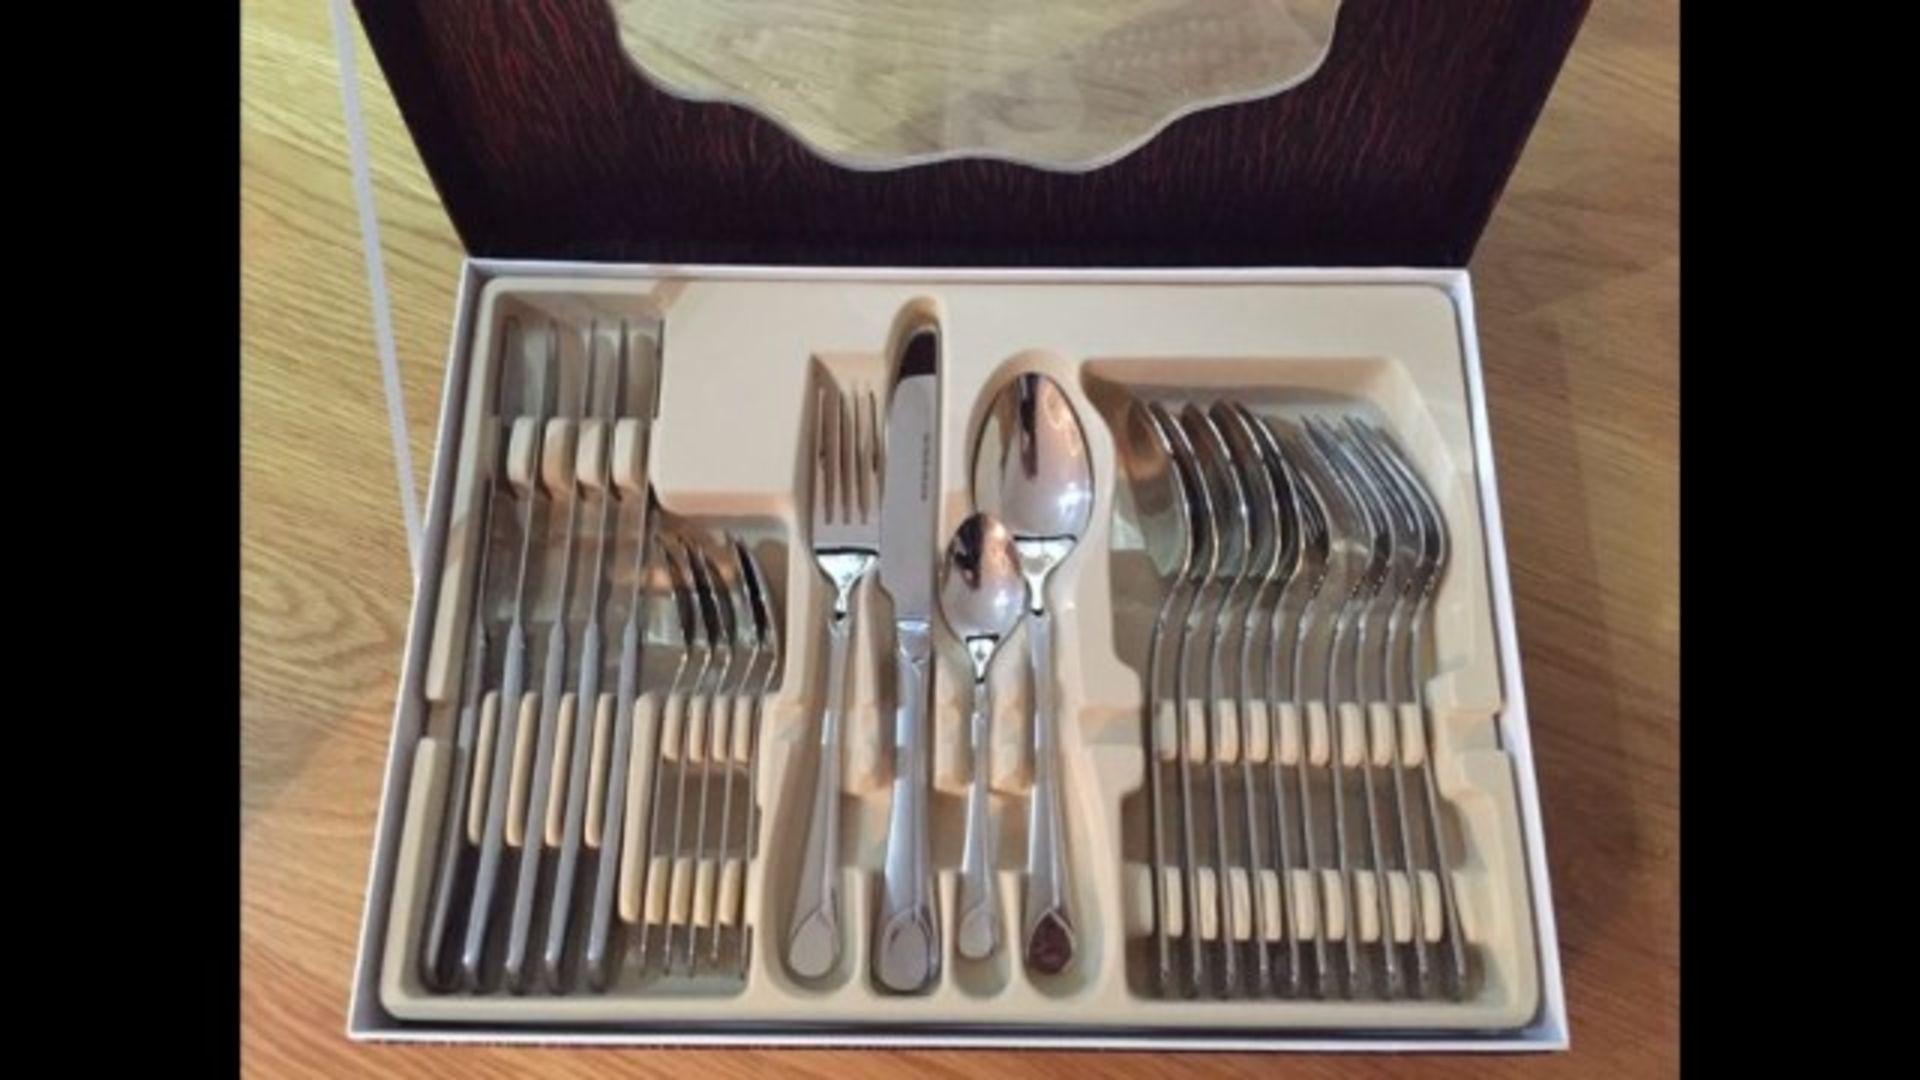 V Brand New Waltmann & Son 24 Piece Polished Stainless Steel And Satin Finish Cutlery Set RRP399.